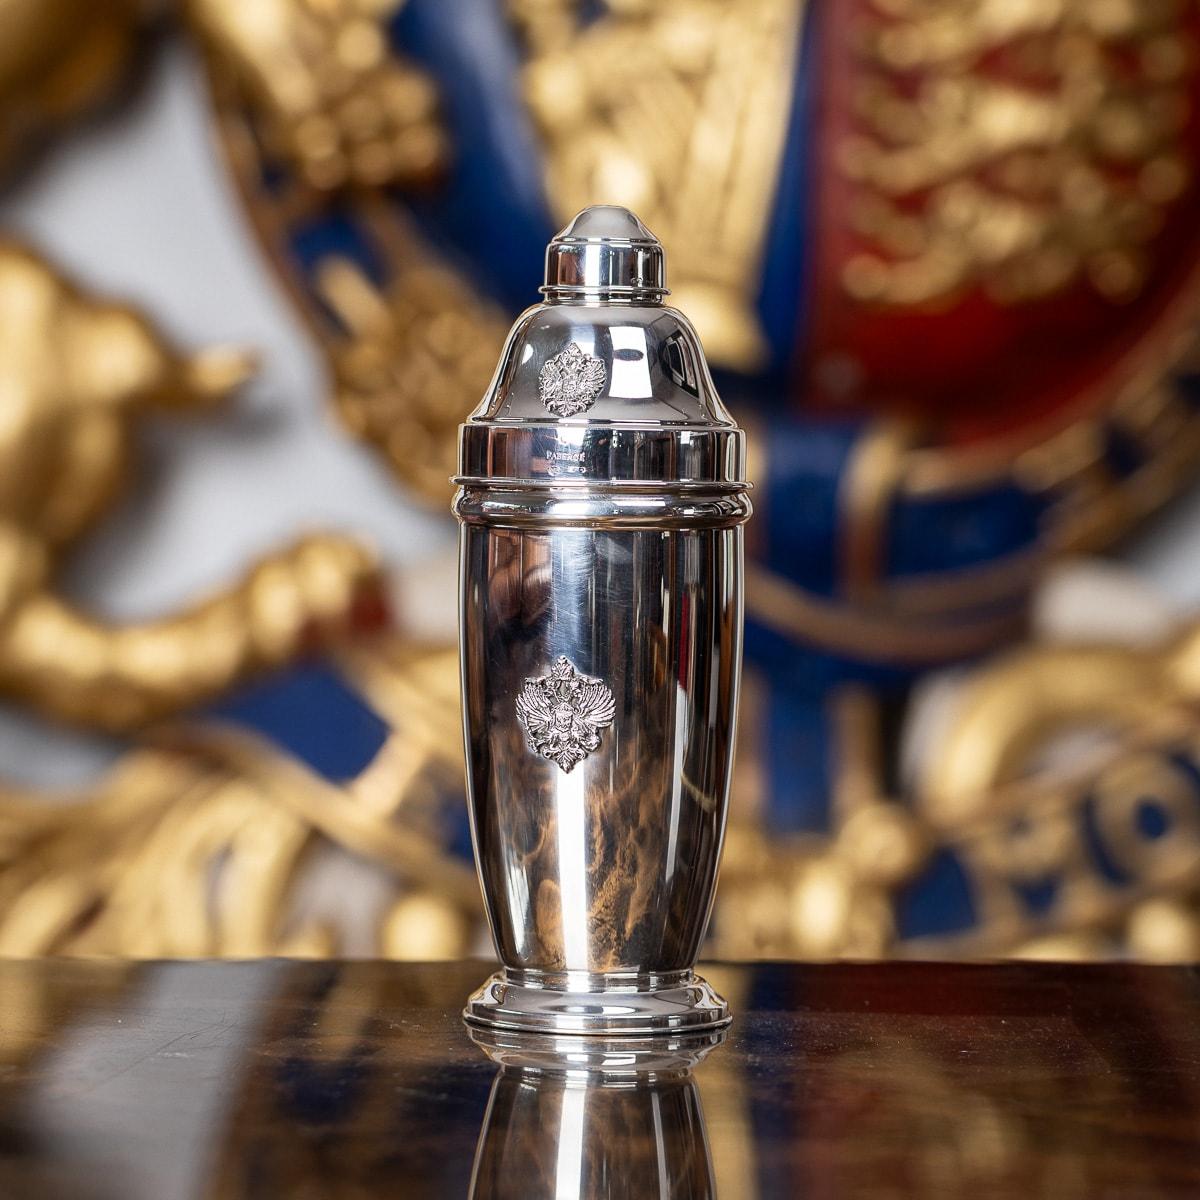 A superb Fabergé sterling cocktail shaker, featuring a polished, round, tapered body on a flared base. Both on the lid and shaker body have the Romanov eagle crest displayed in high relief. Hallmarked FABERGÉ, Italian Silver, 925 sterling silver,